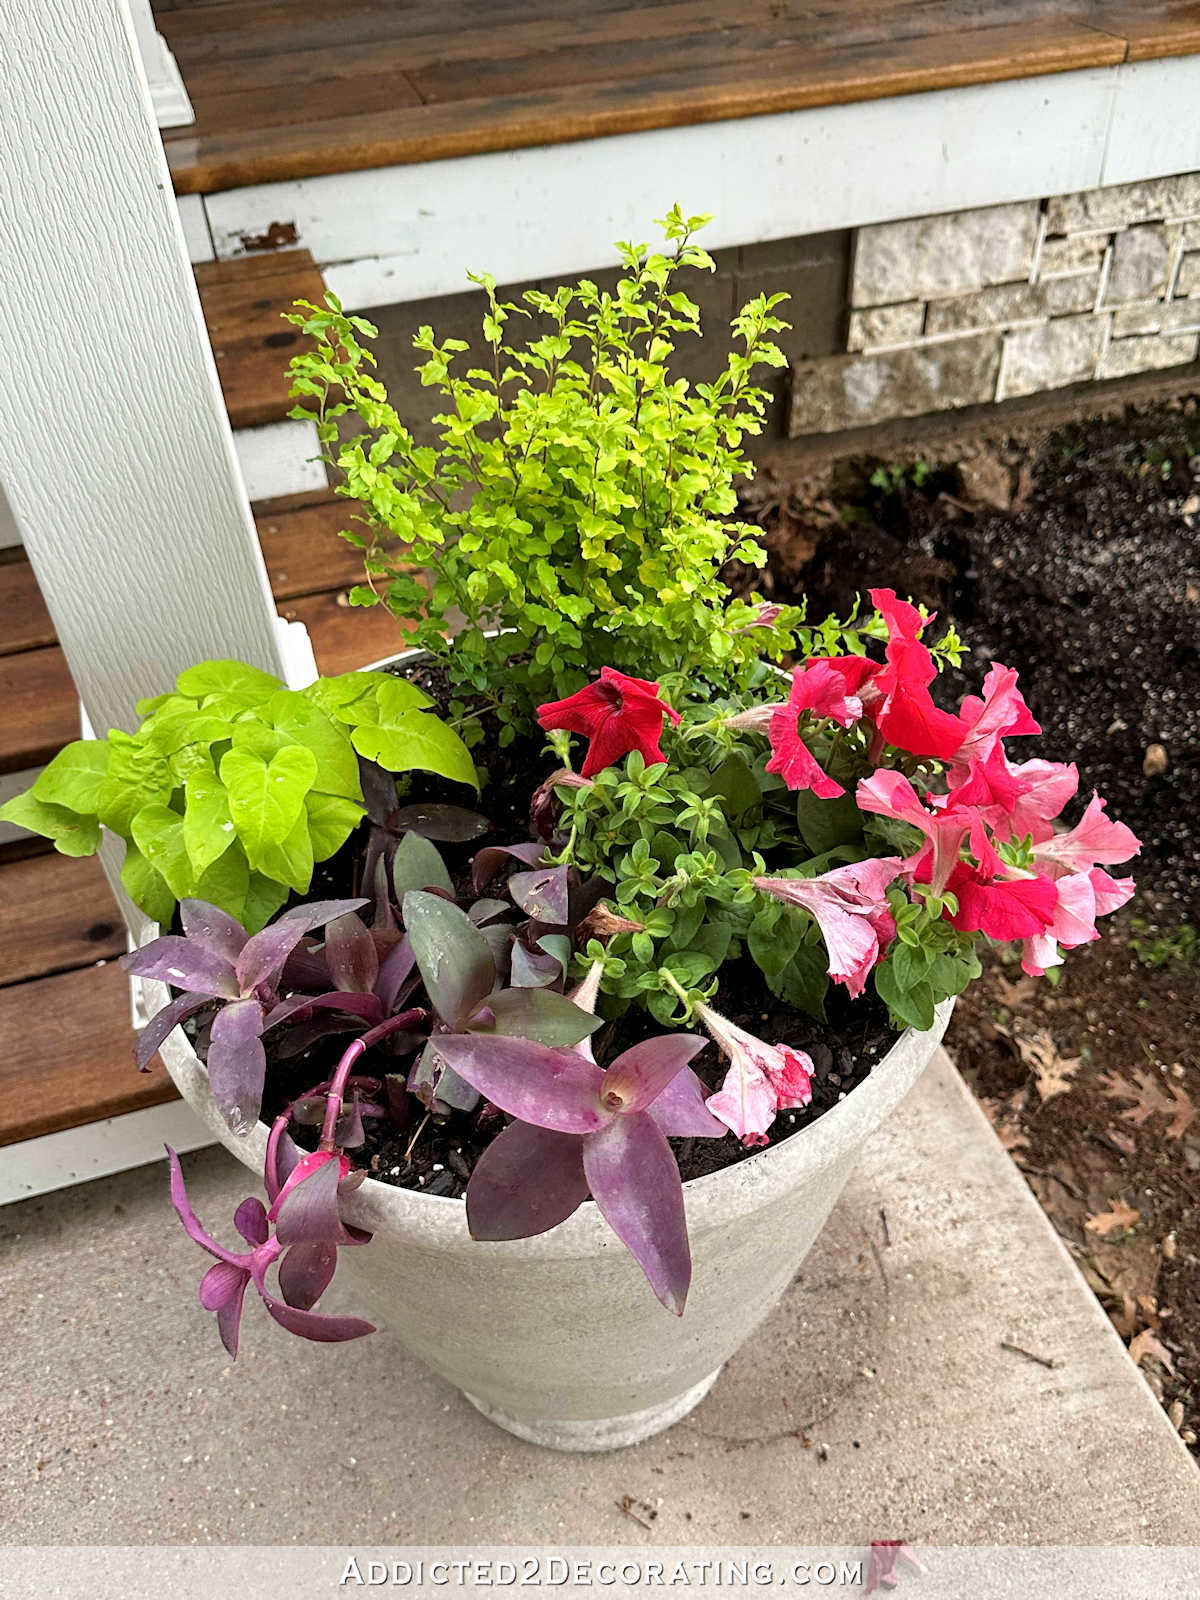 New Plants For The Front Porch (Plus, A Story About The Kindness Of A Stranger)